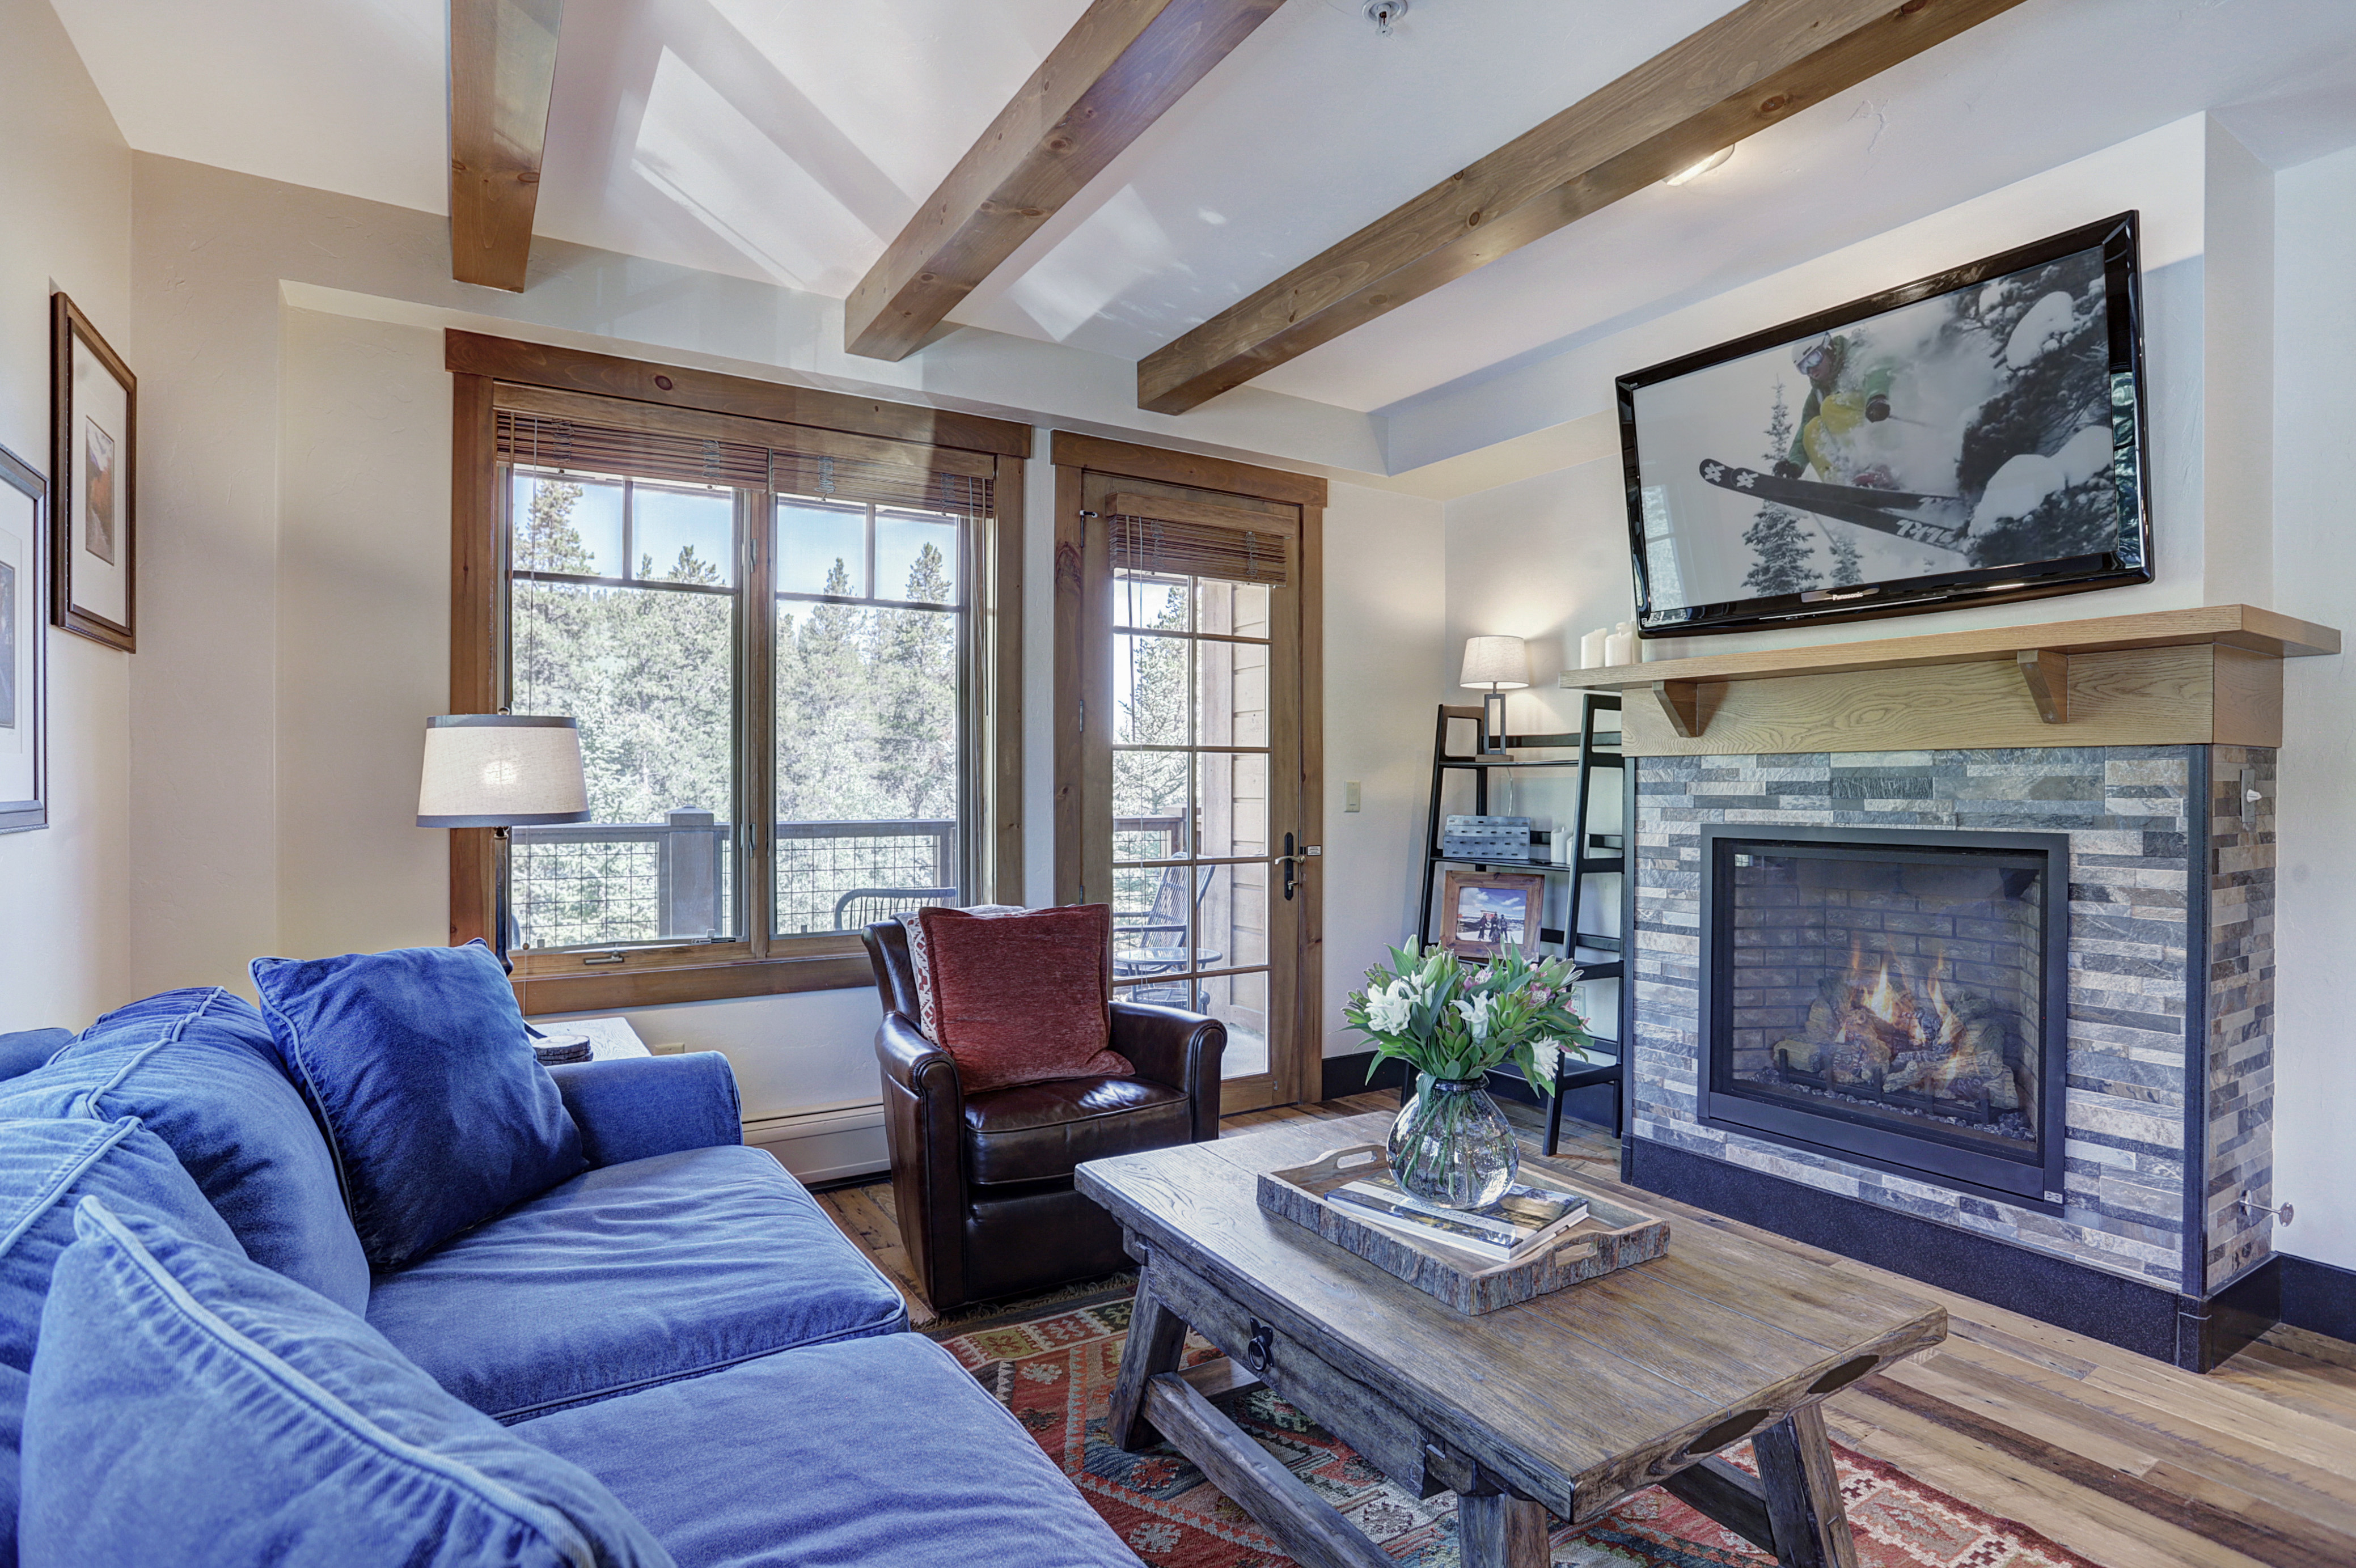 Warm by the gas fireplace and snuggle in to watch a movie or show